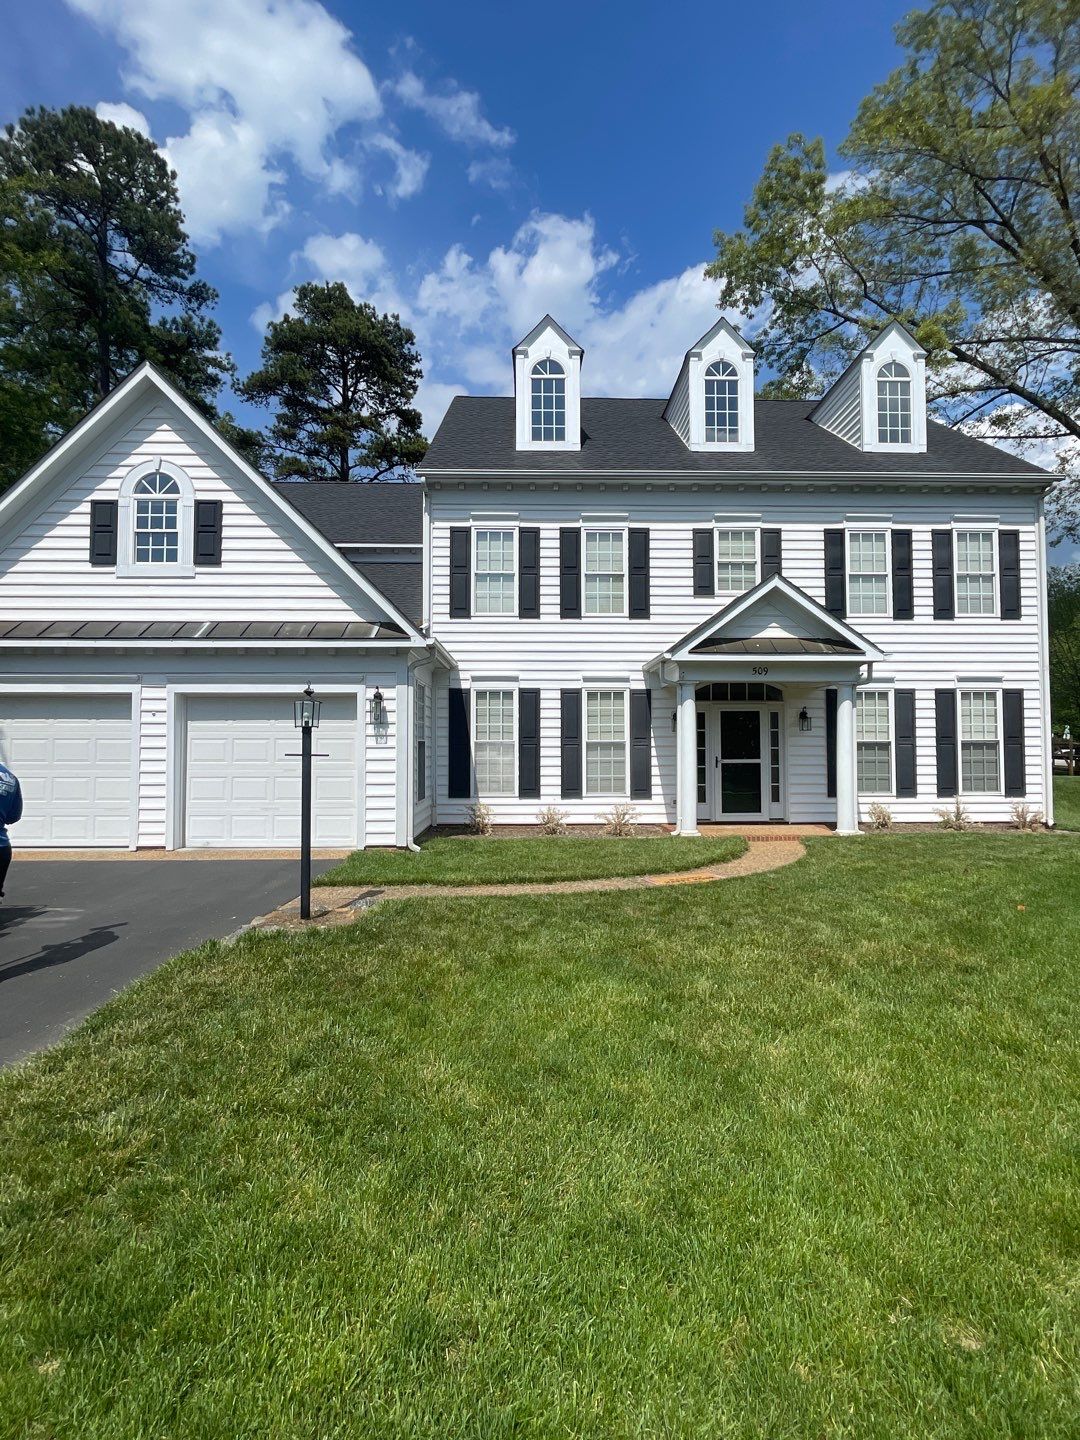 Gutter Cleaning and House Washing in Charlottesville, VA